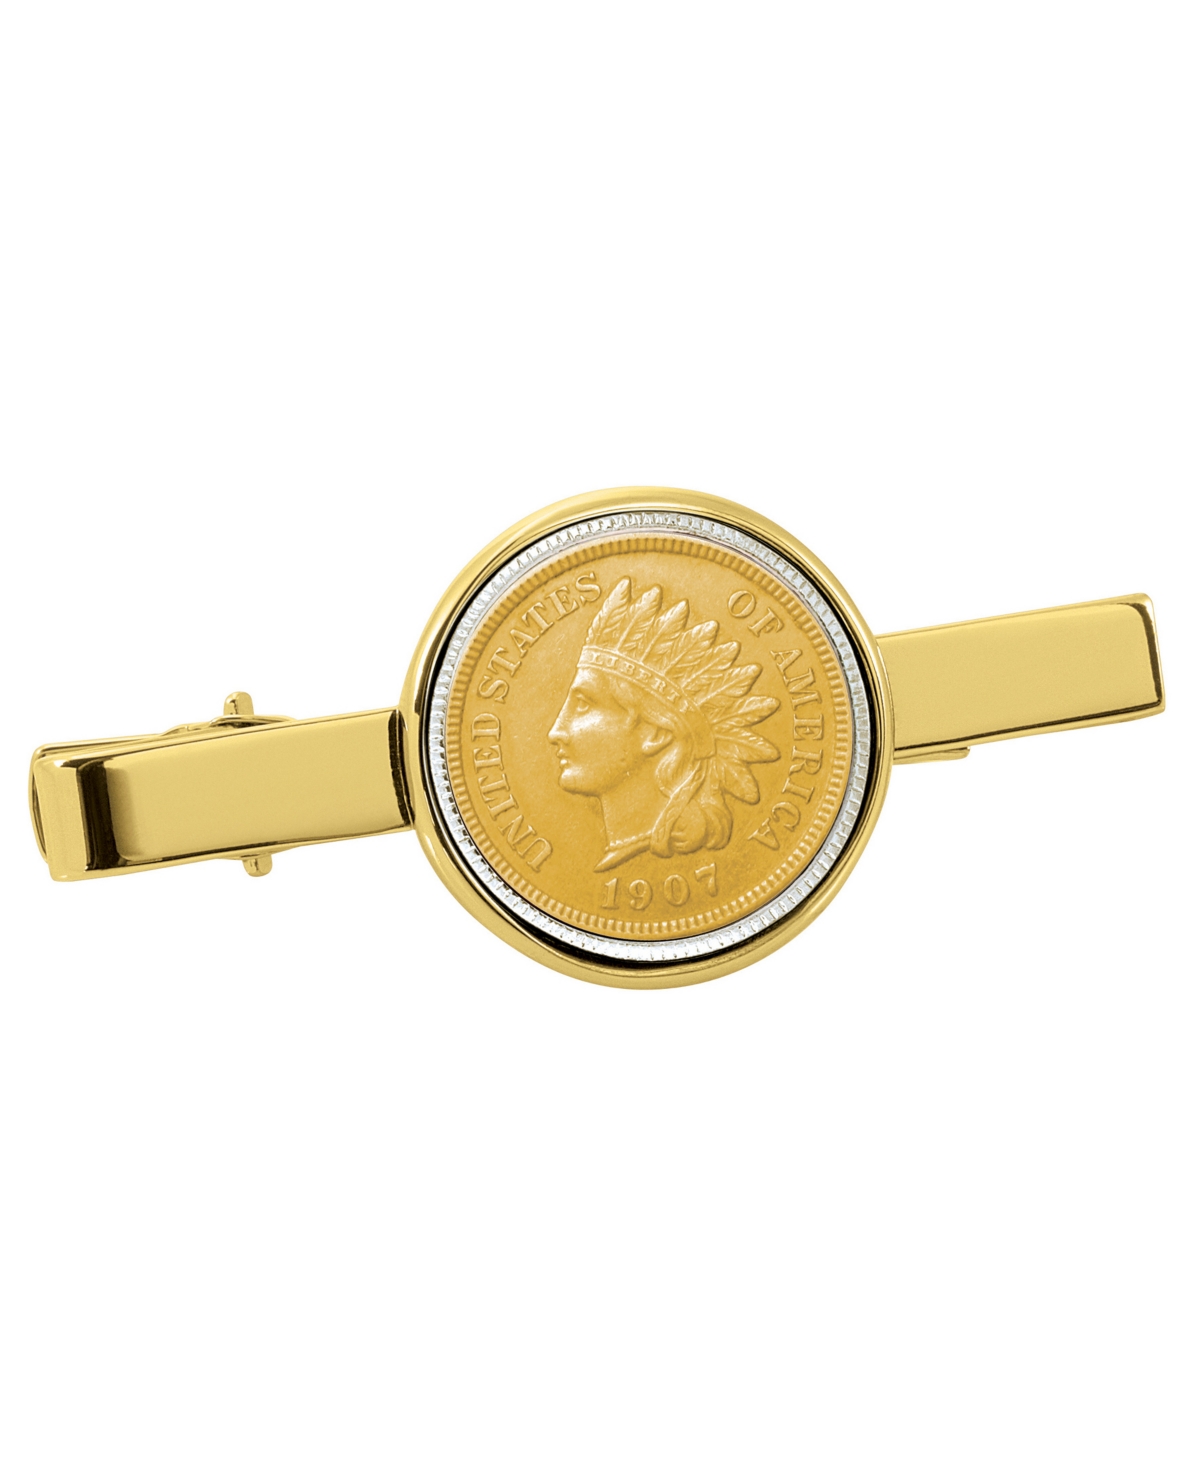 Gold-Layered Indian Penny Coin Tie Clip - Gold